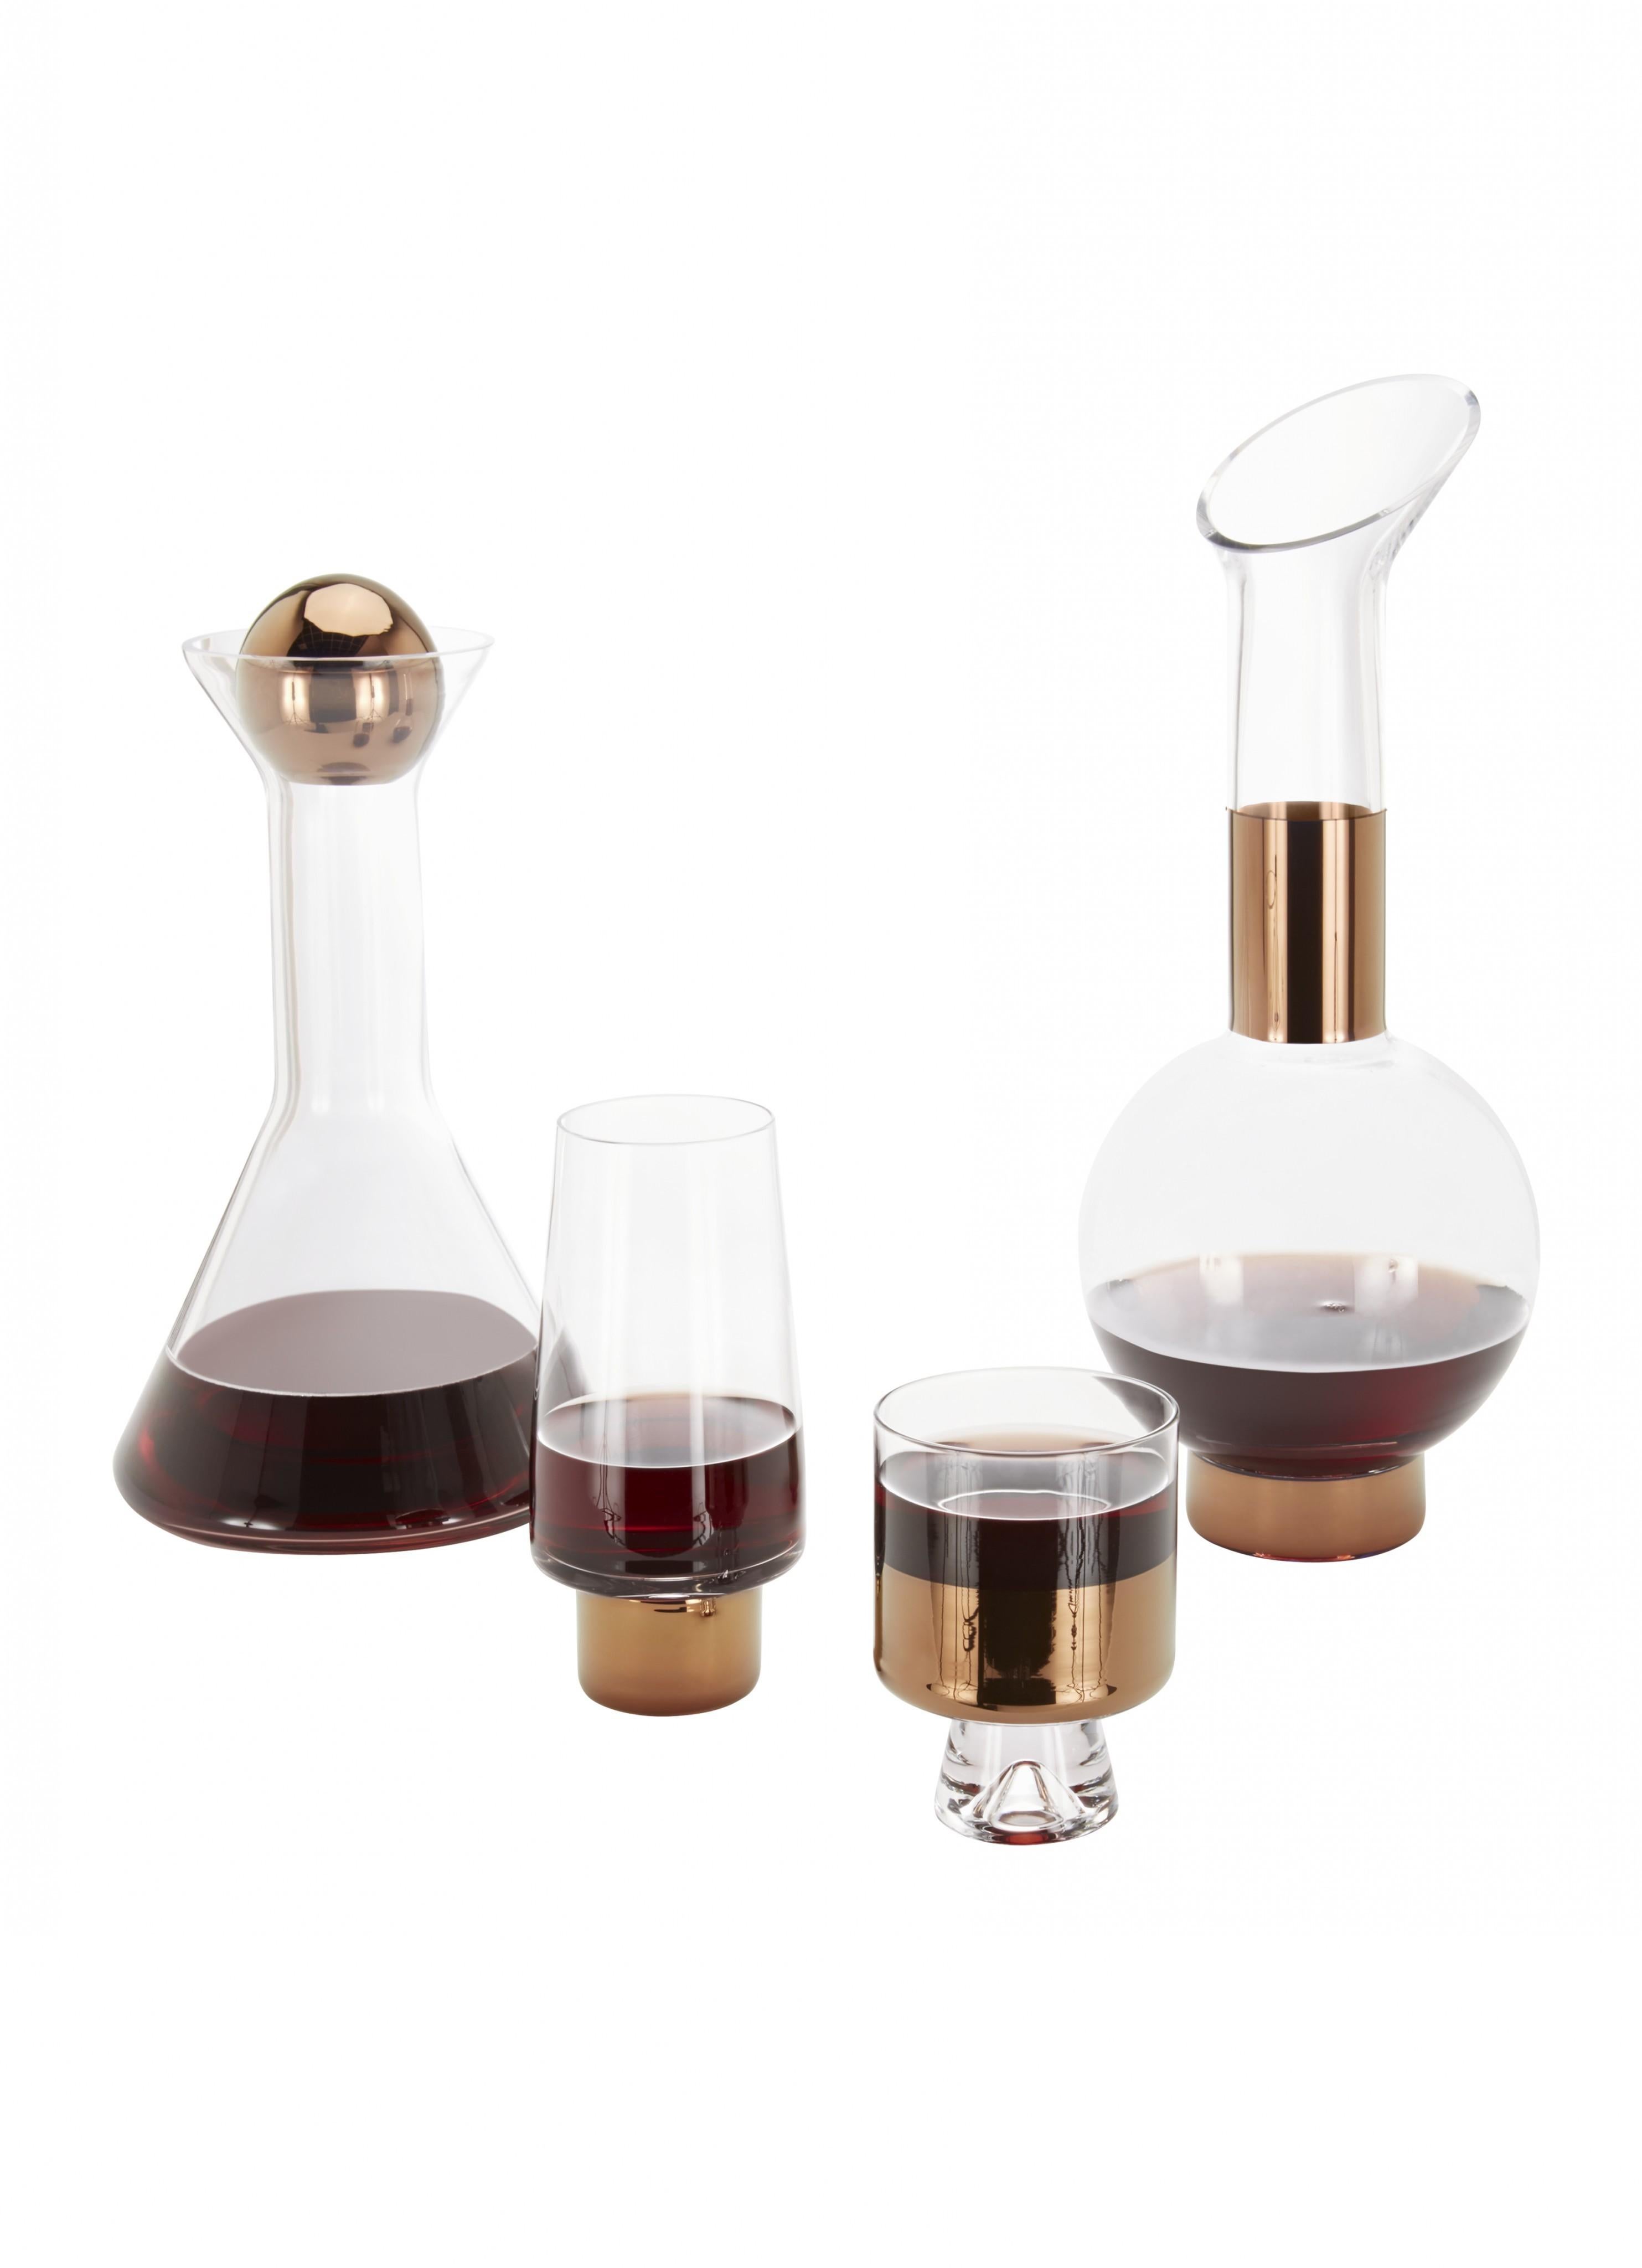 Tank high ball glasses are mouth-blown and ornamented with hand painted copper detailing they go hand in hand with our tank low ball glasses and pair beautifully with items from our plum range too. Especially designed for long-drinks, perfect for a